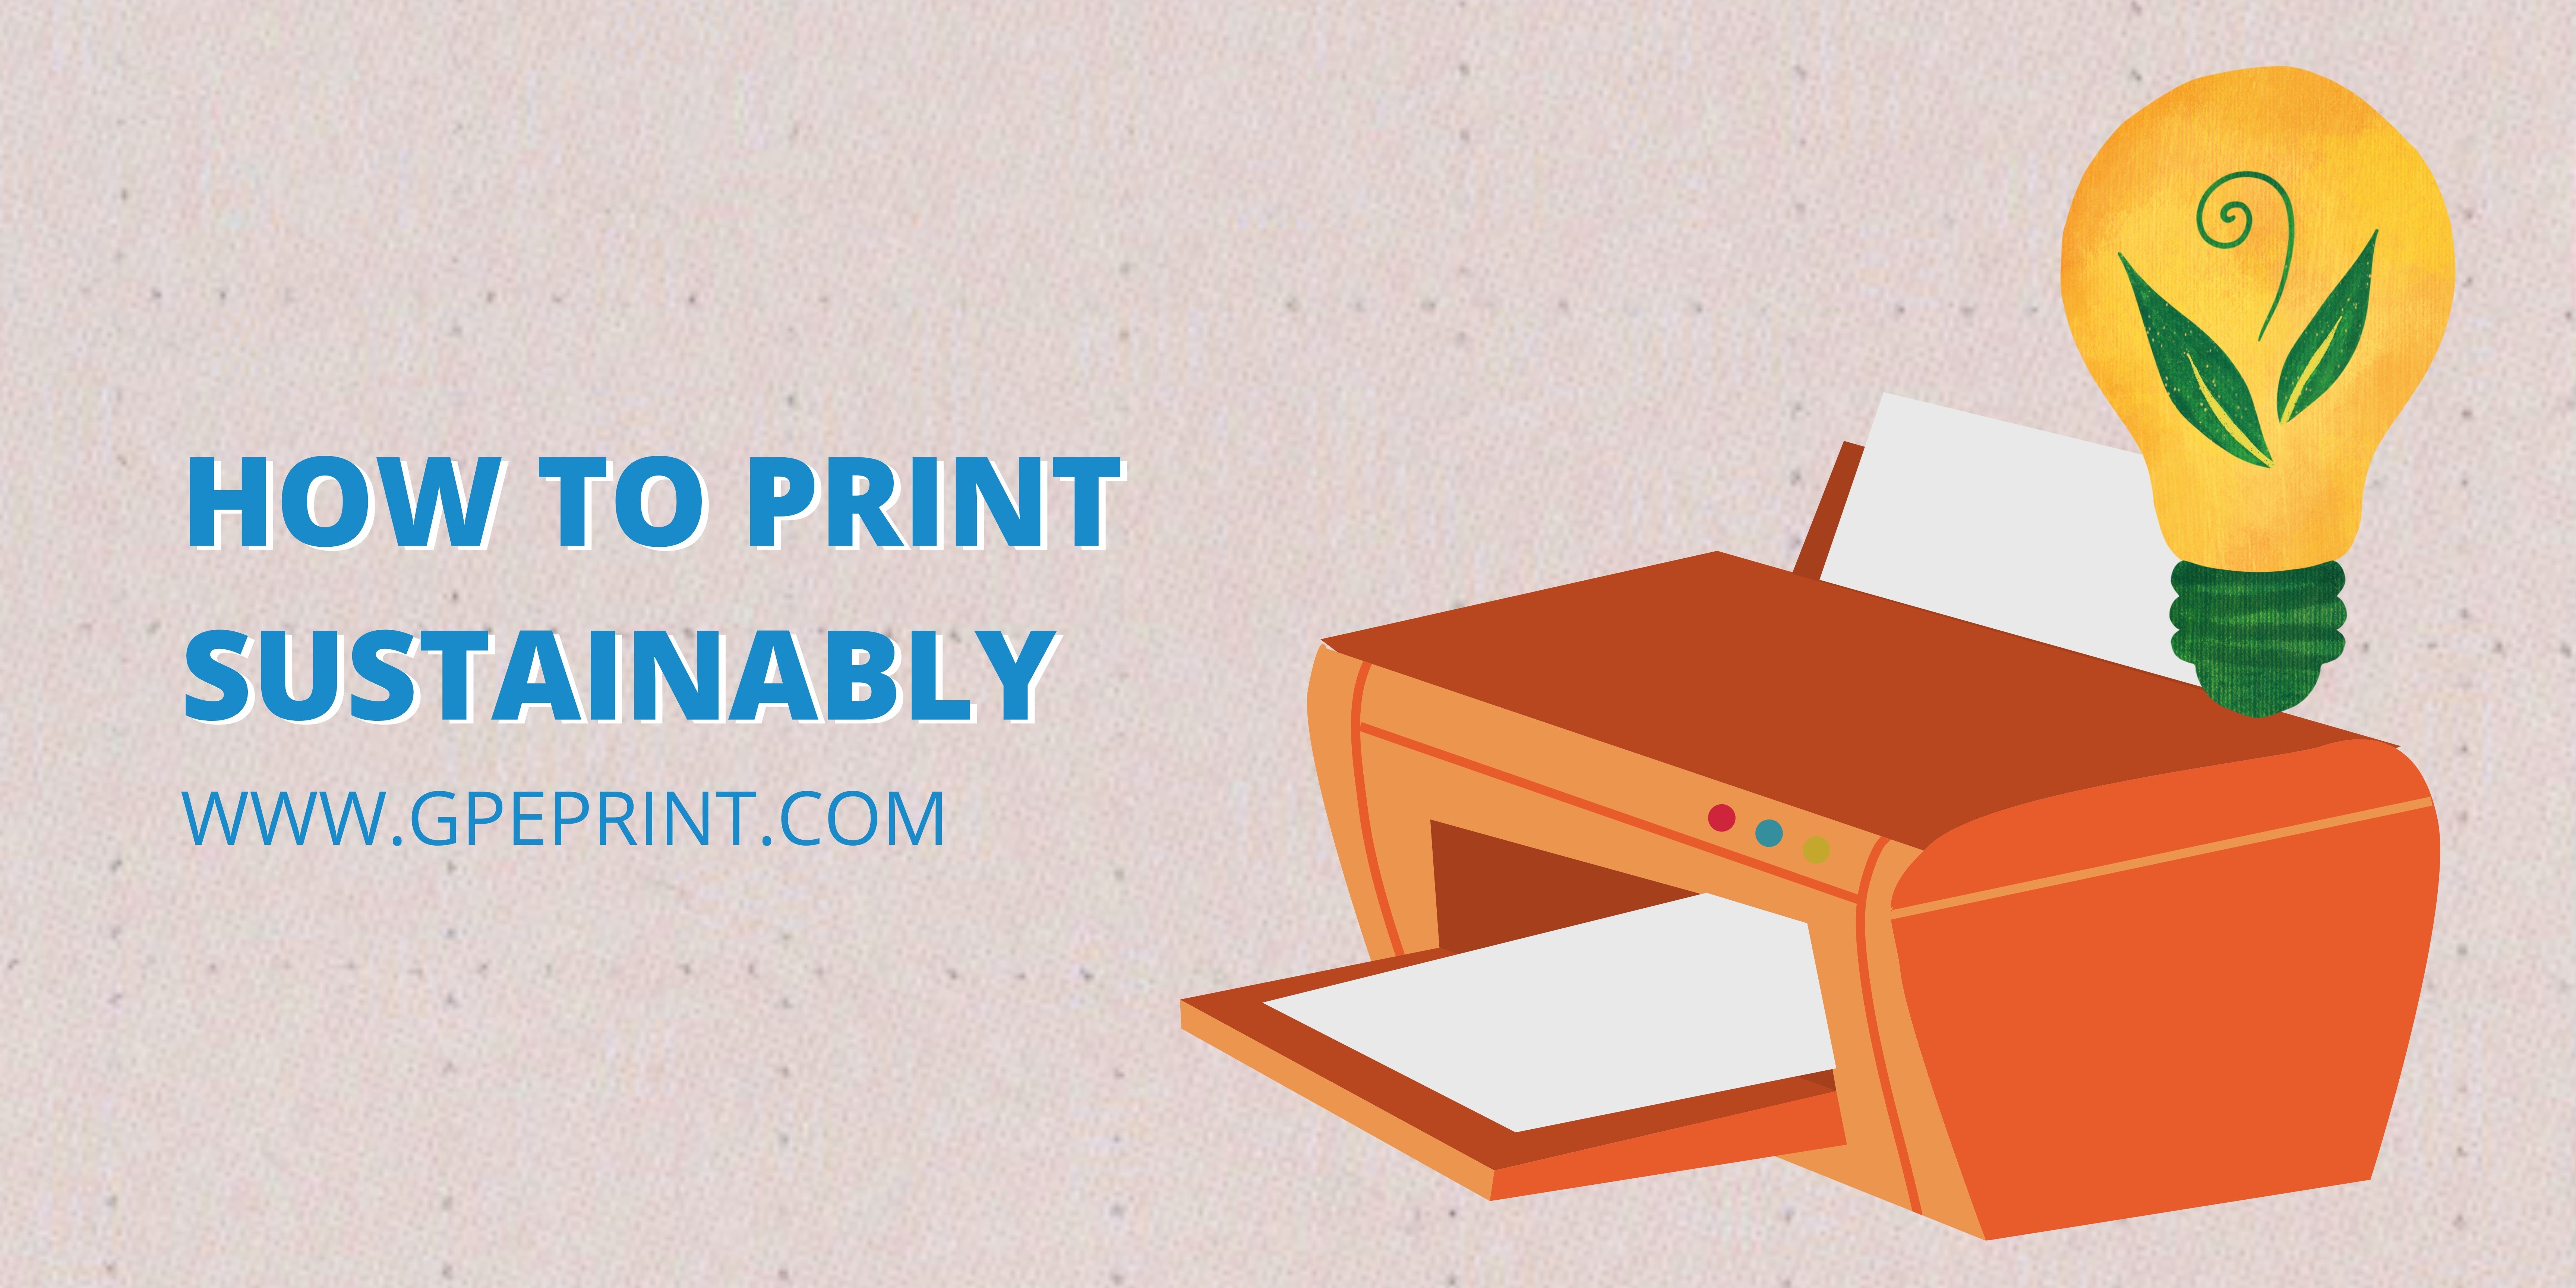 How to Print Sustainably